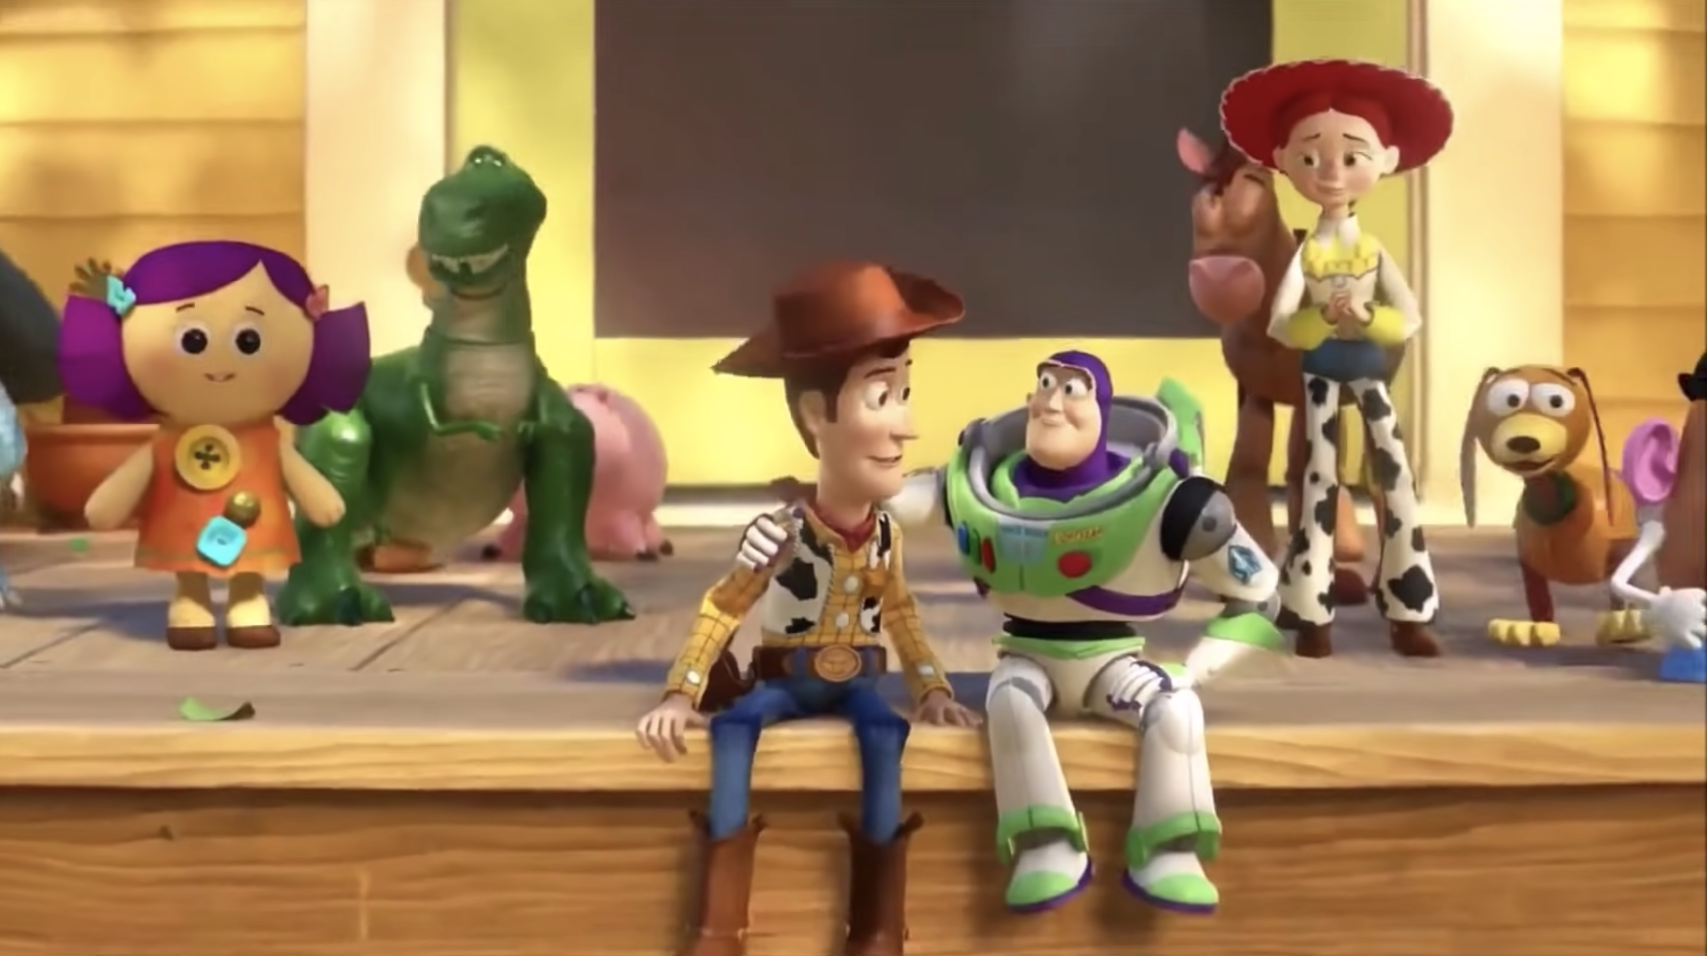 Toys from toy story